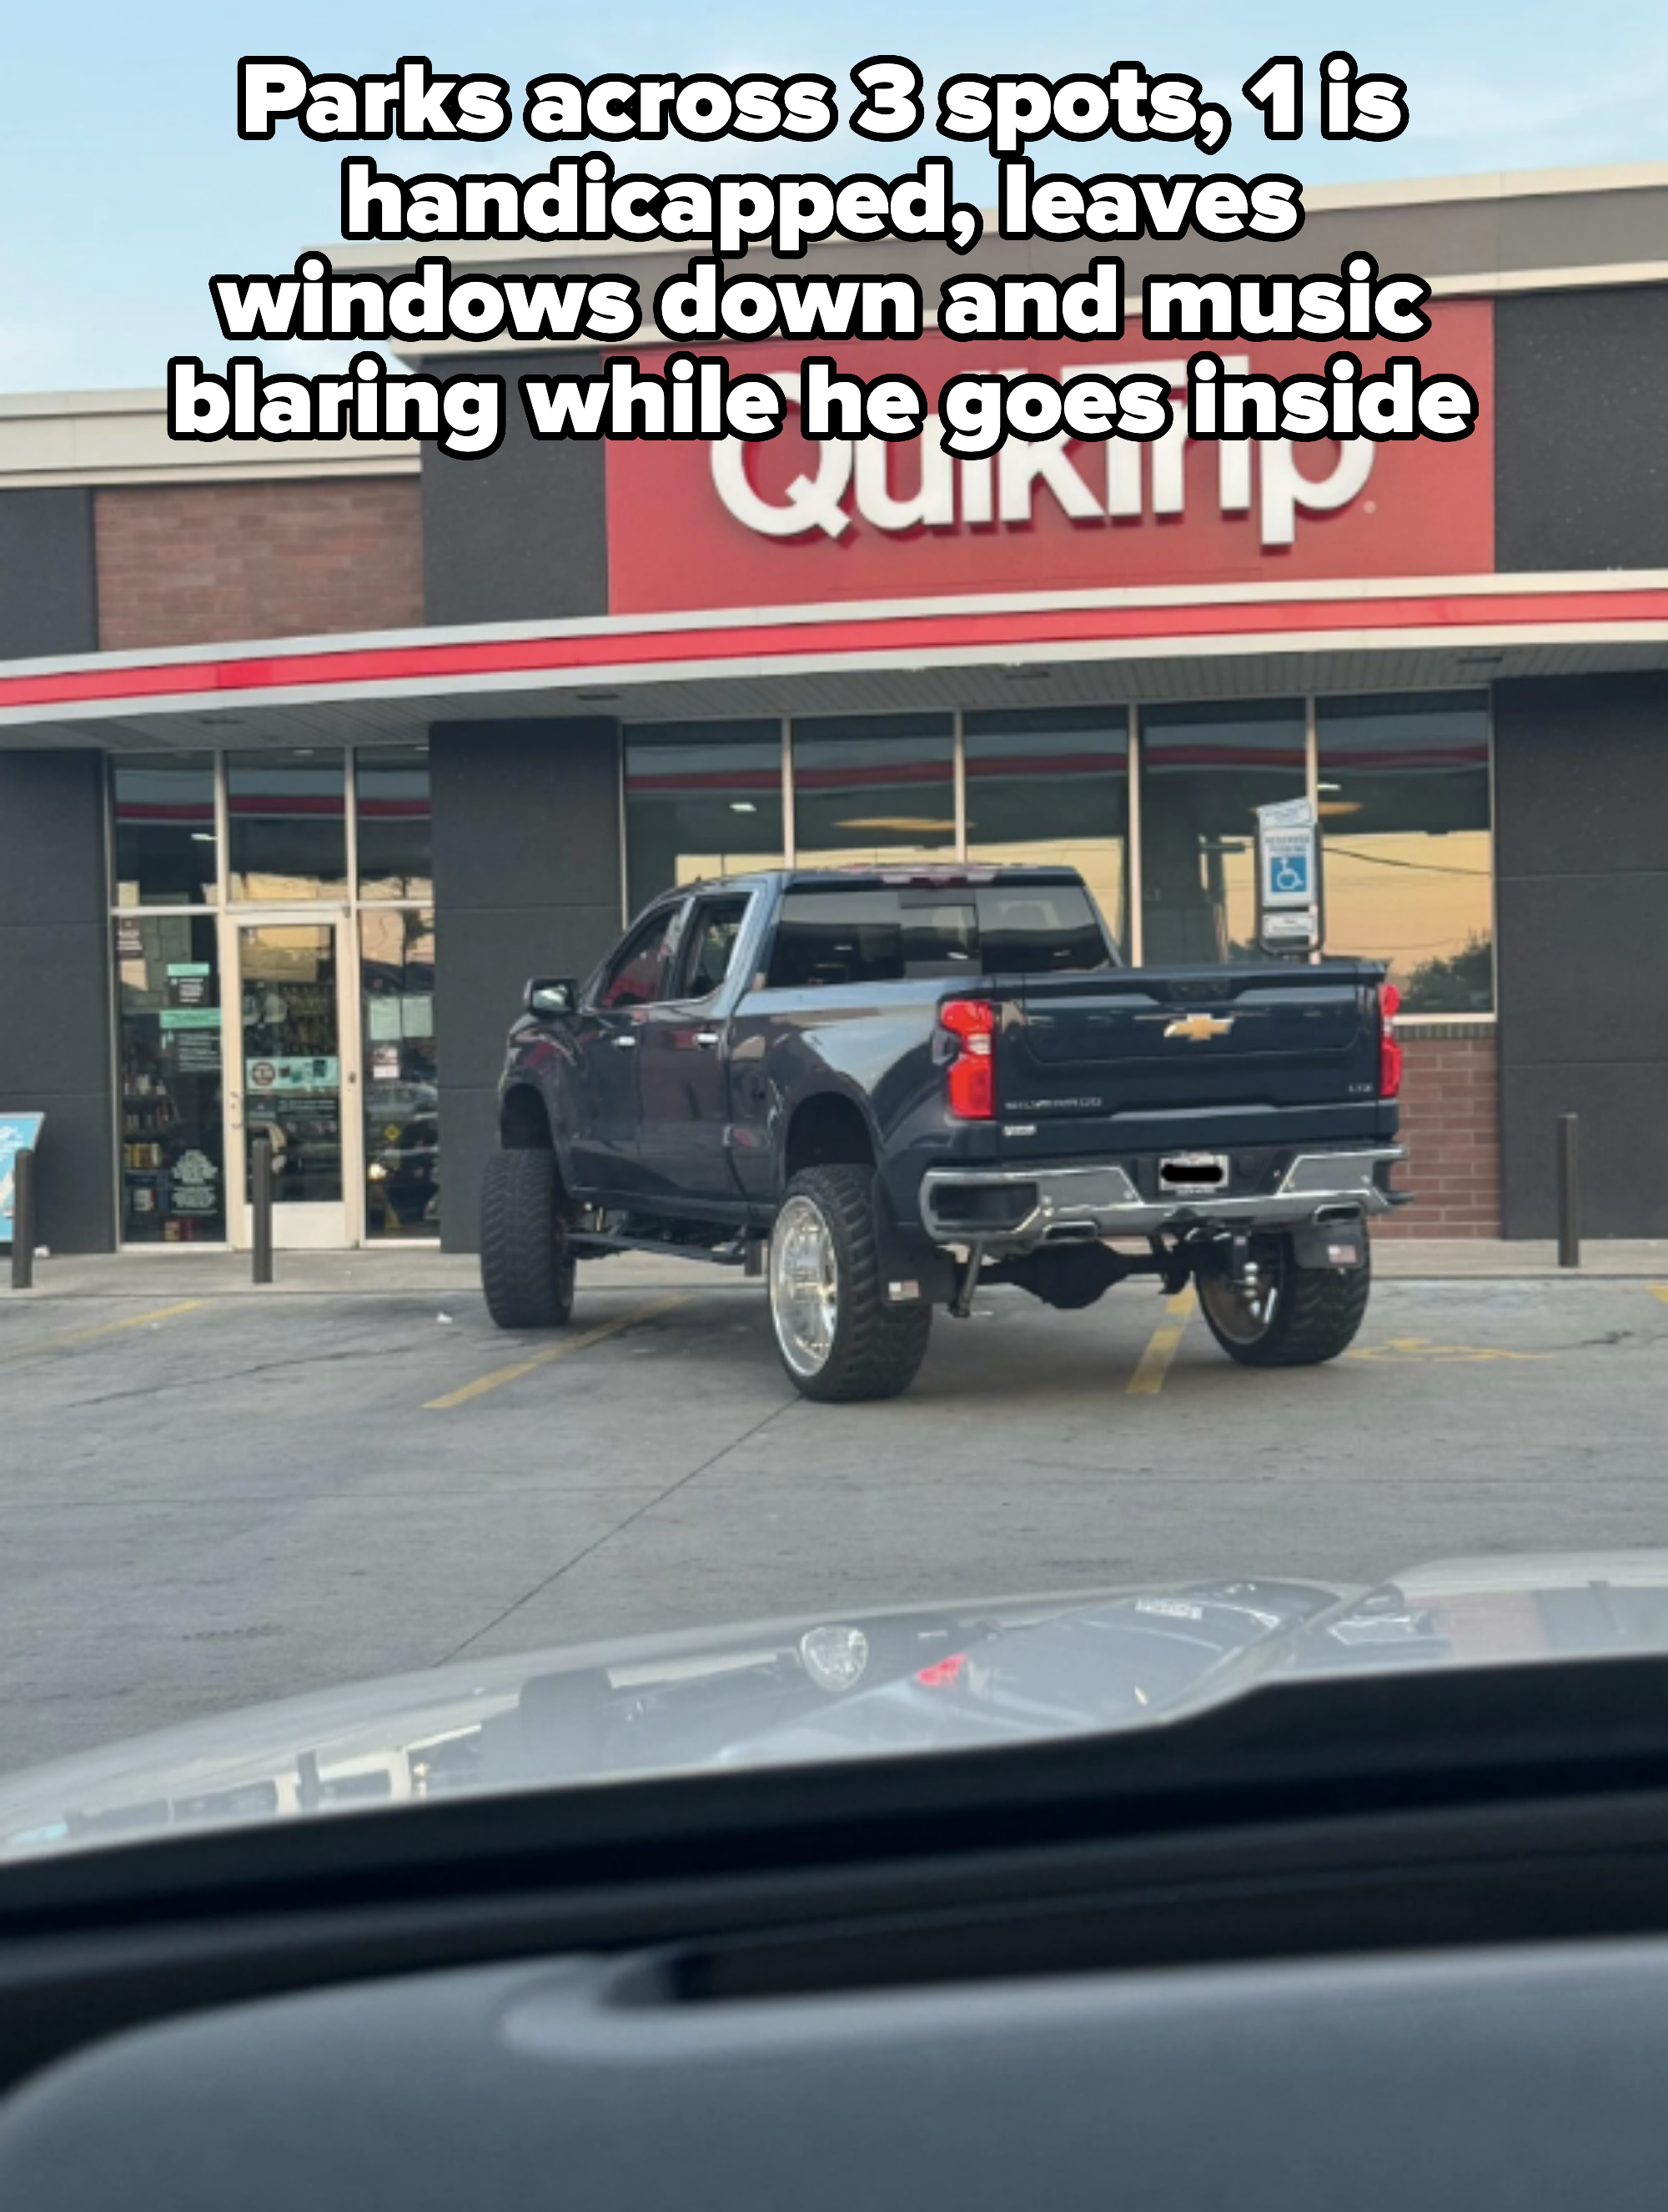 A large lifted Chevrolet truck is parked in front of a QuikTrip convenience store